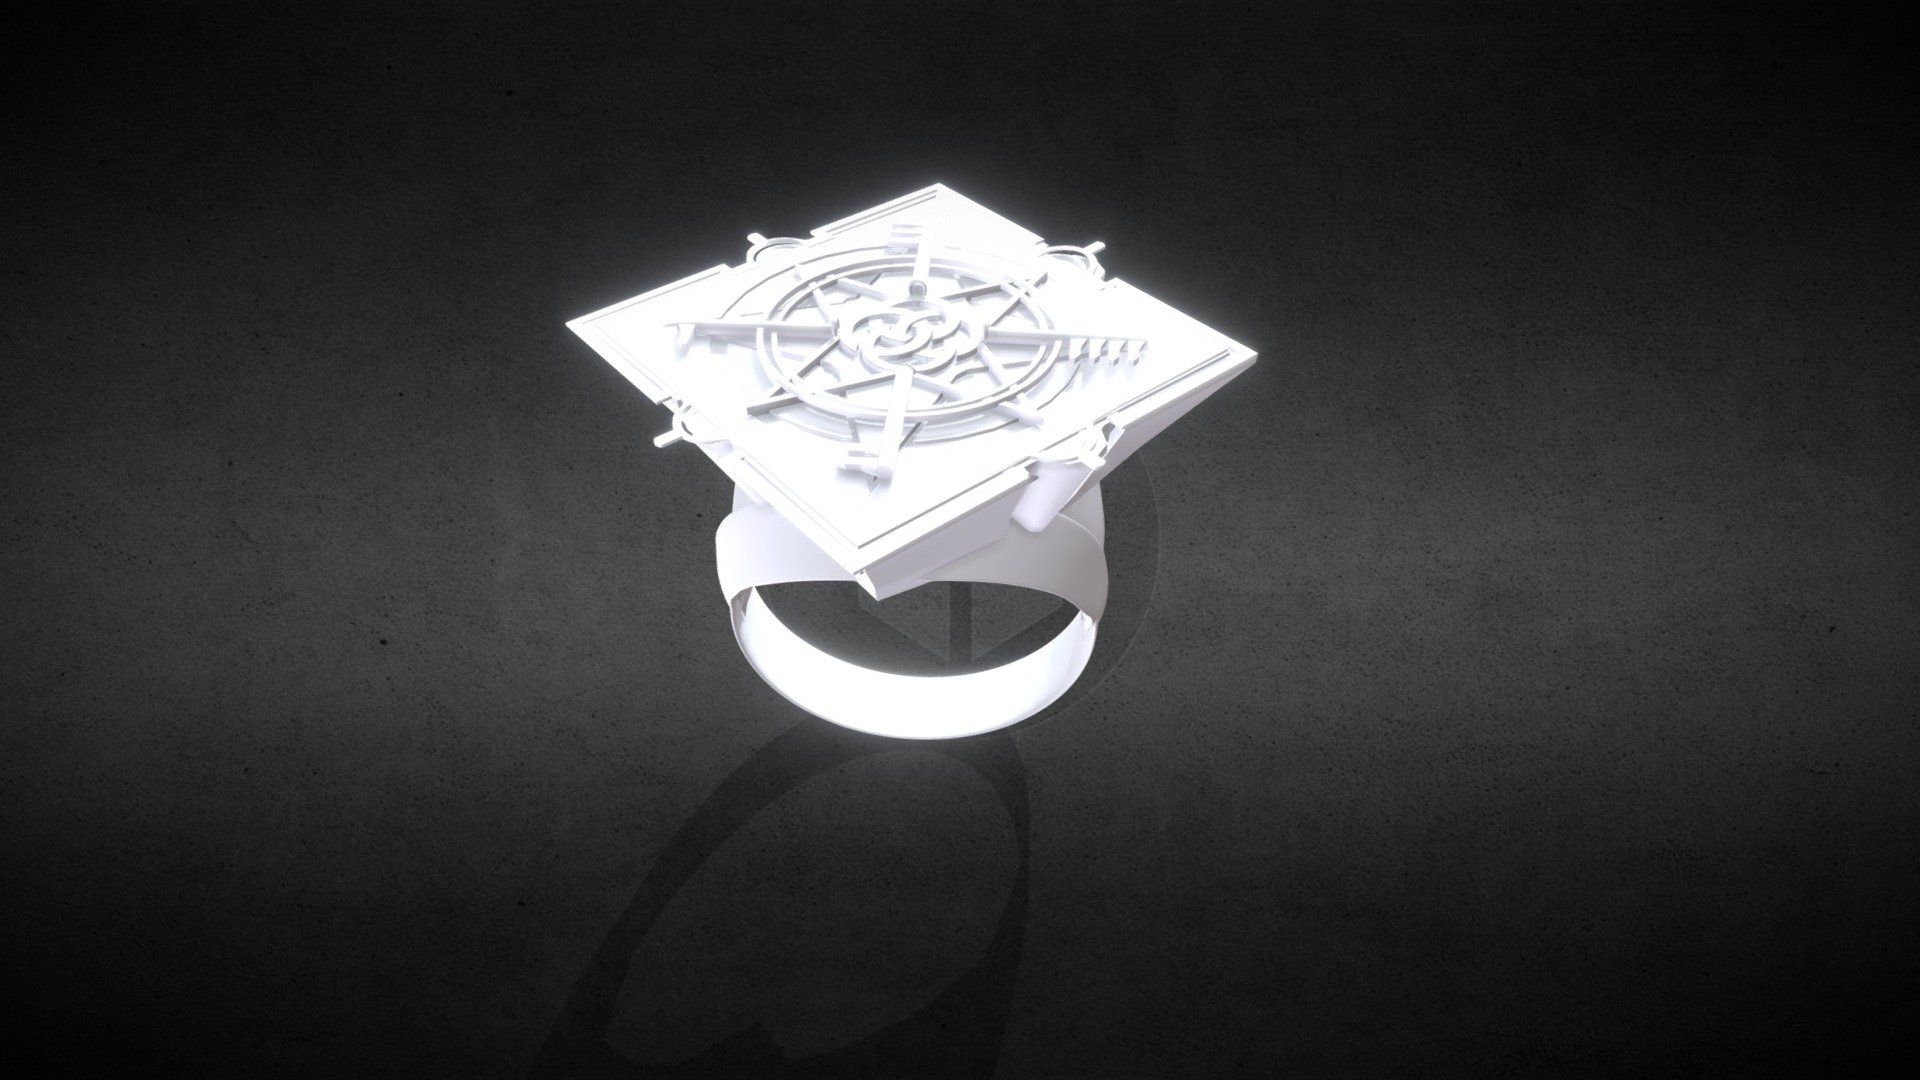 【Dishonored】Imperial Signet Ring - Download Free 3D model by emilyliu2333 3d model